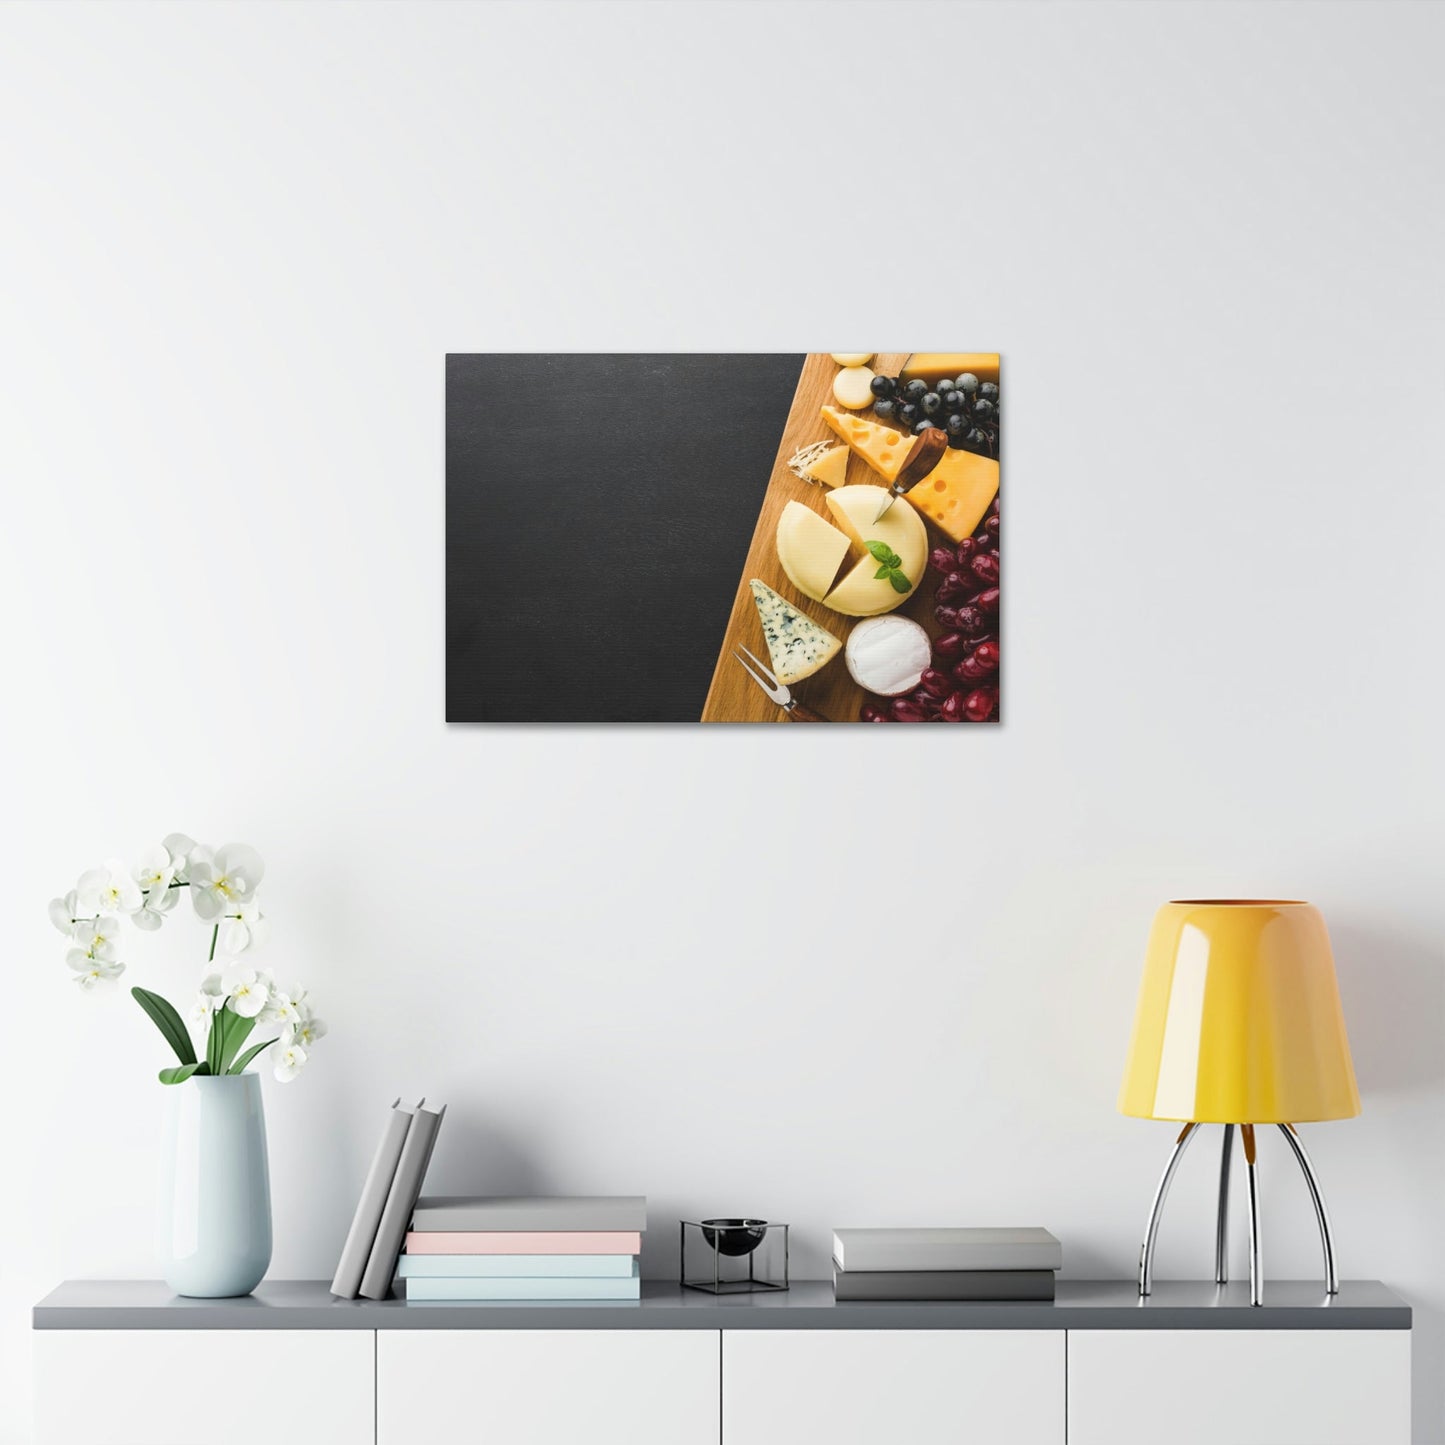 The Art of Cheese: Natural Canvas Prints of Gourmet Cheese Wheels